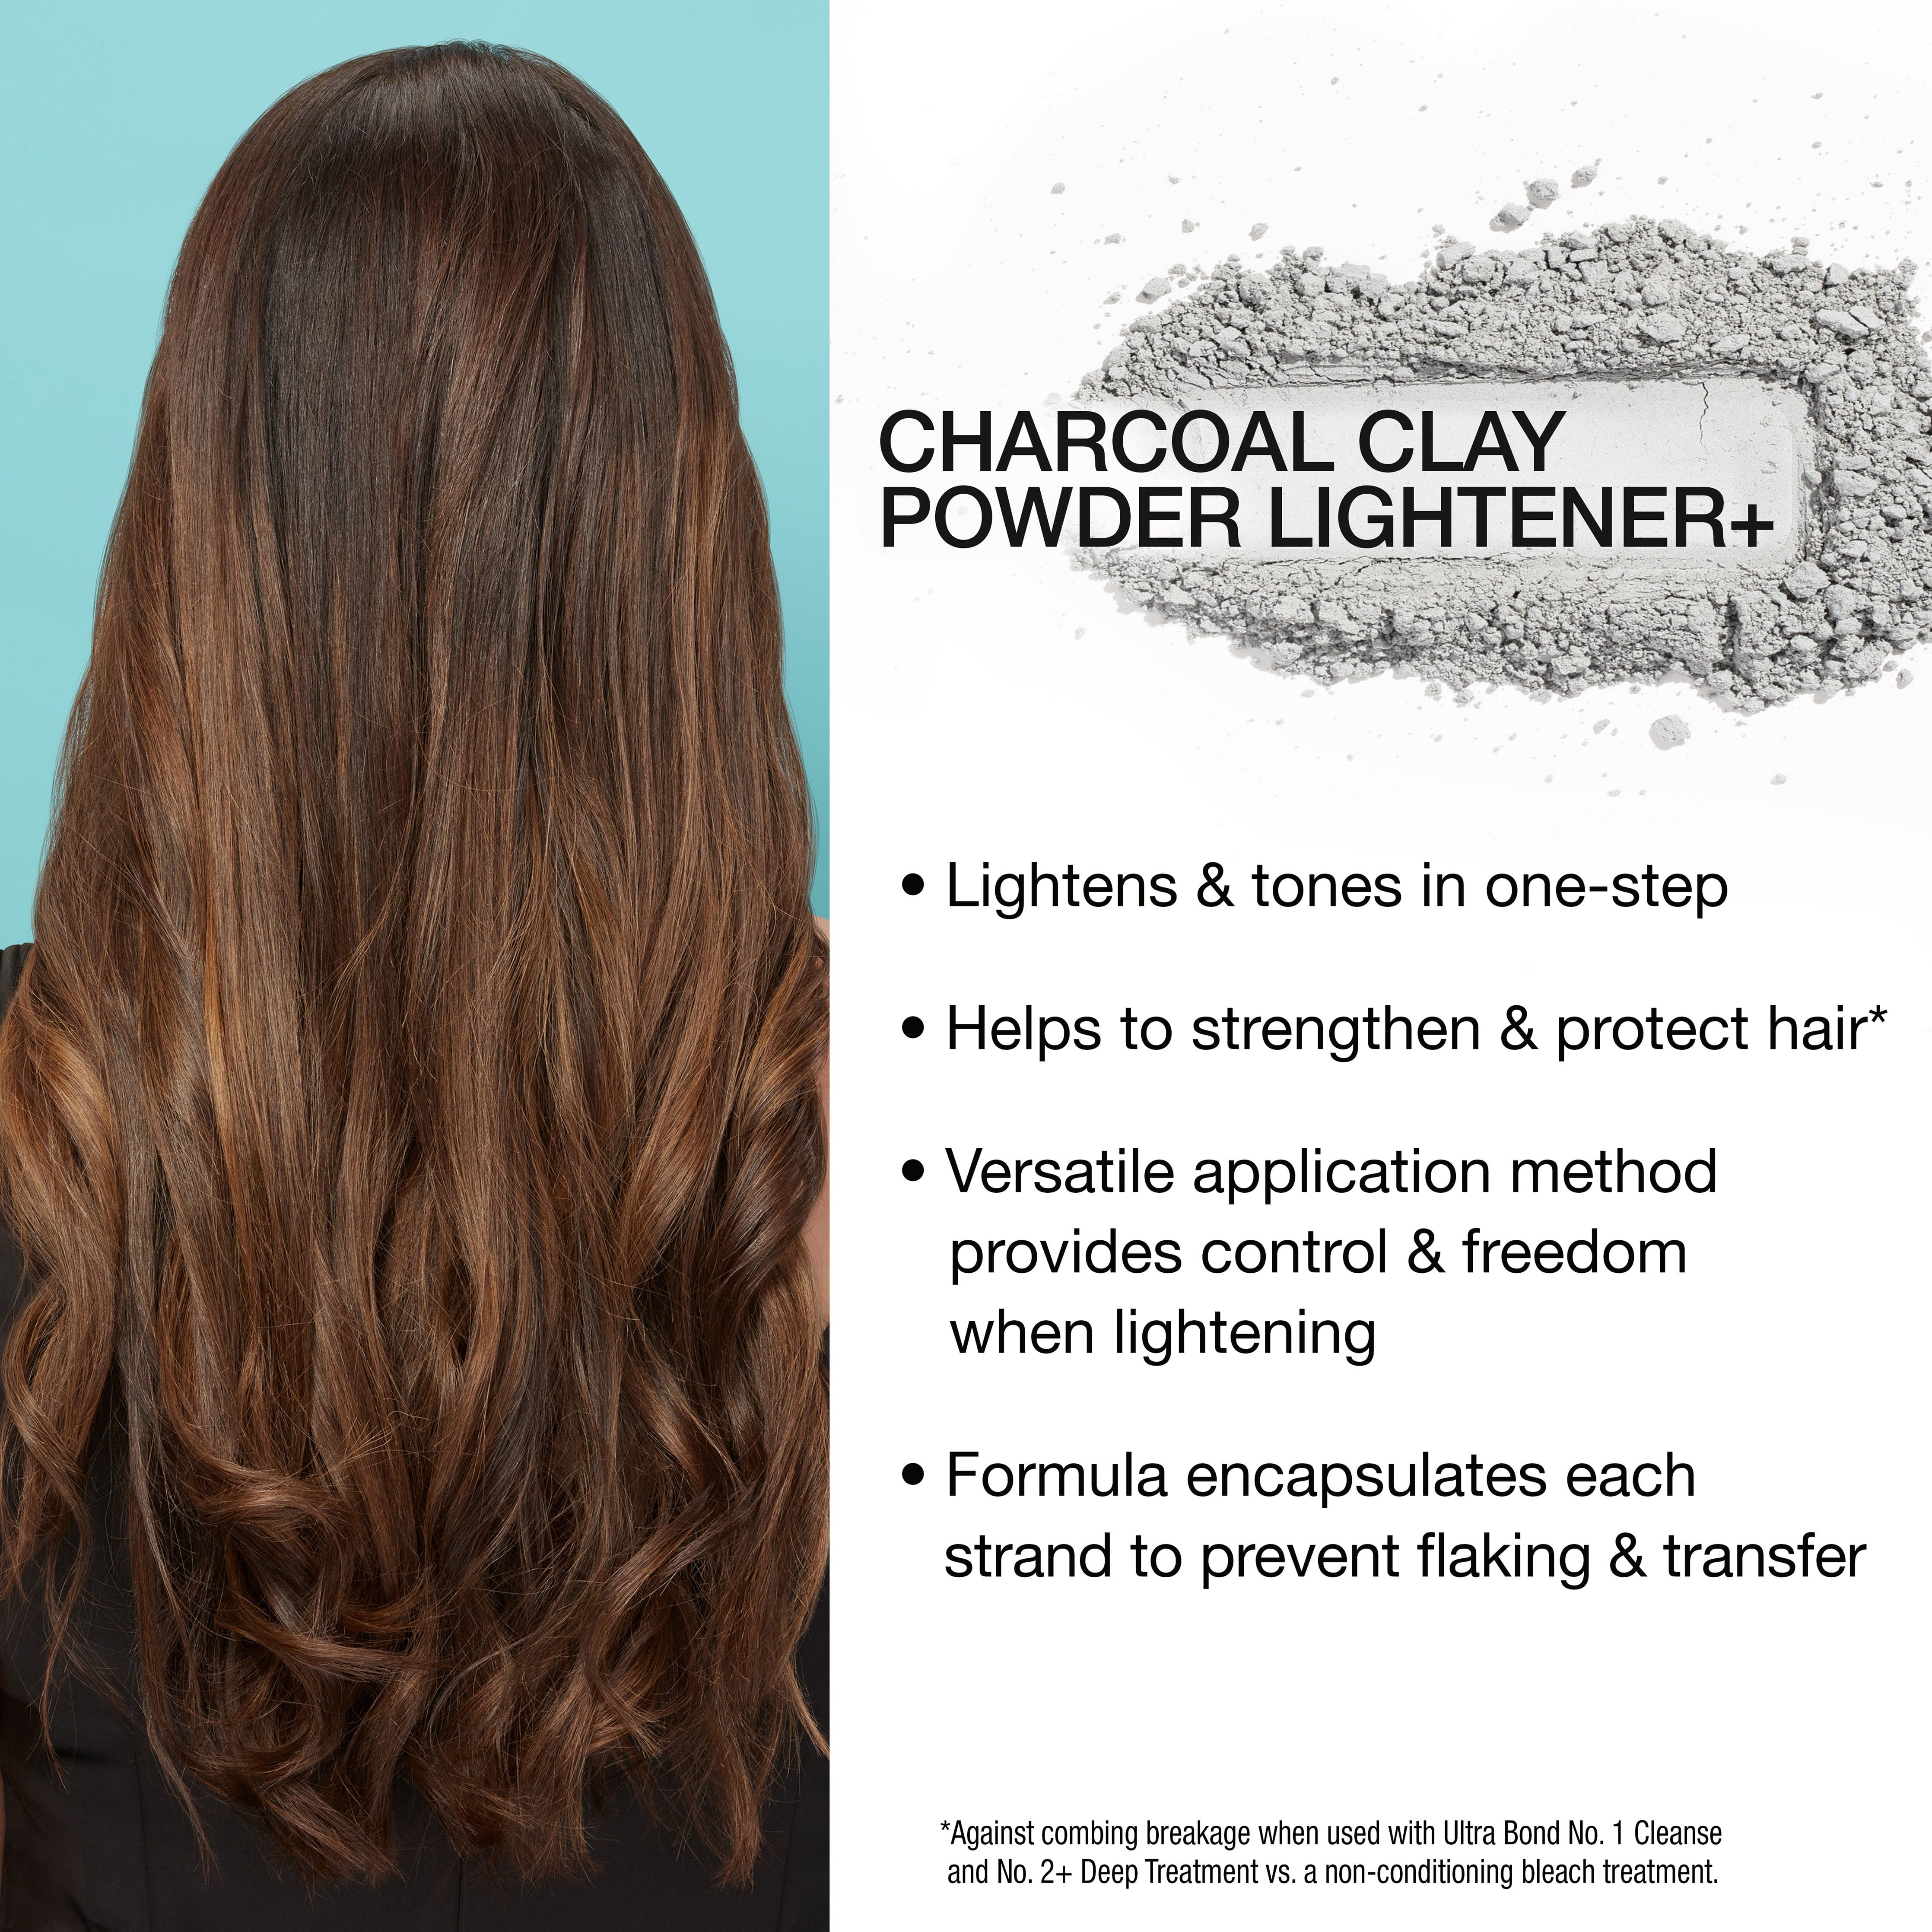 Lightens and tones in one-step. Helps to strengthen and protect hair (against combing breakage used with Ultra Bond No. 1 Cleanse and No. 2. Deep Treatment vs. a non-conditioning bleach treatment). Versatile application method provides control and freedom when lightening. Formula encapsulates each strand to prevent flaking and transfer. 